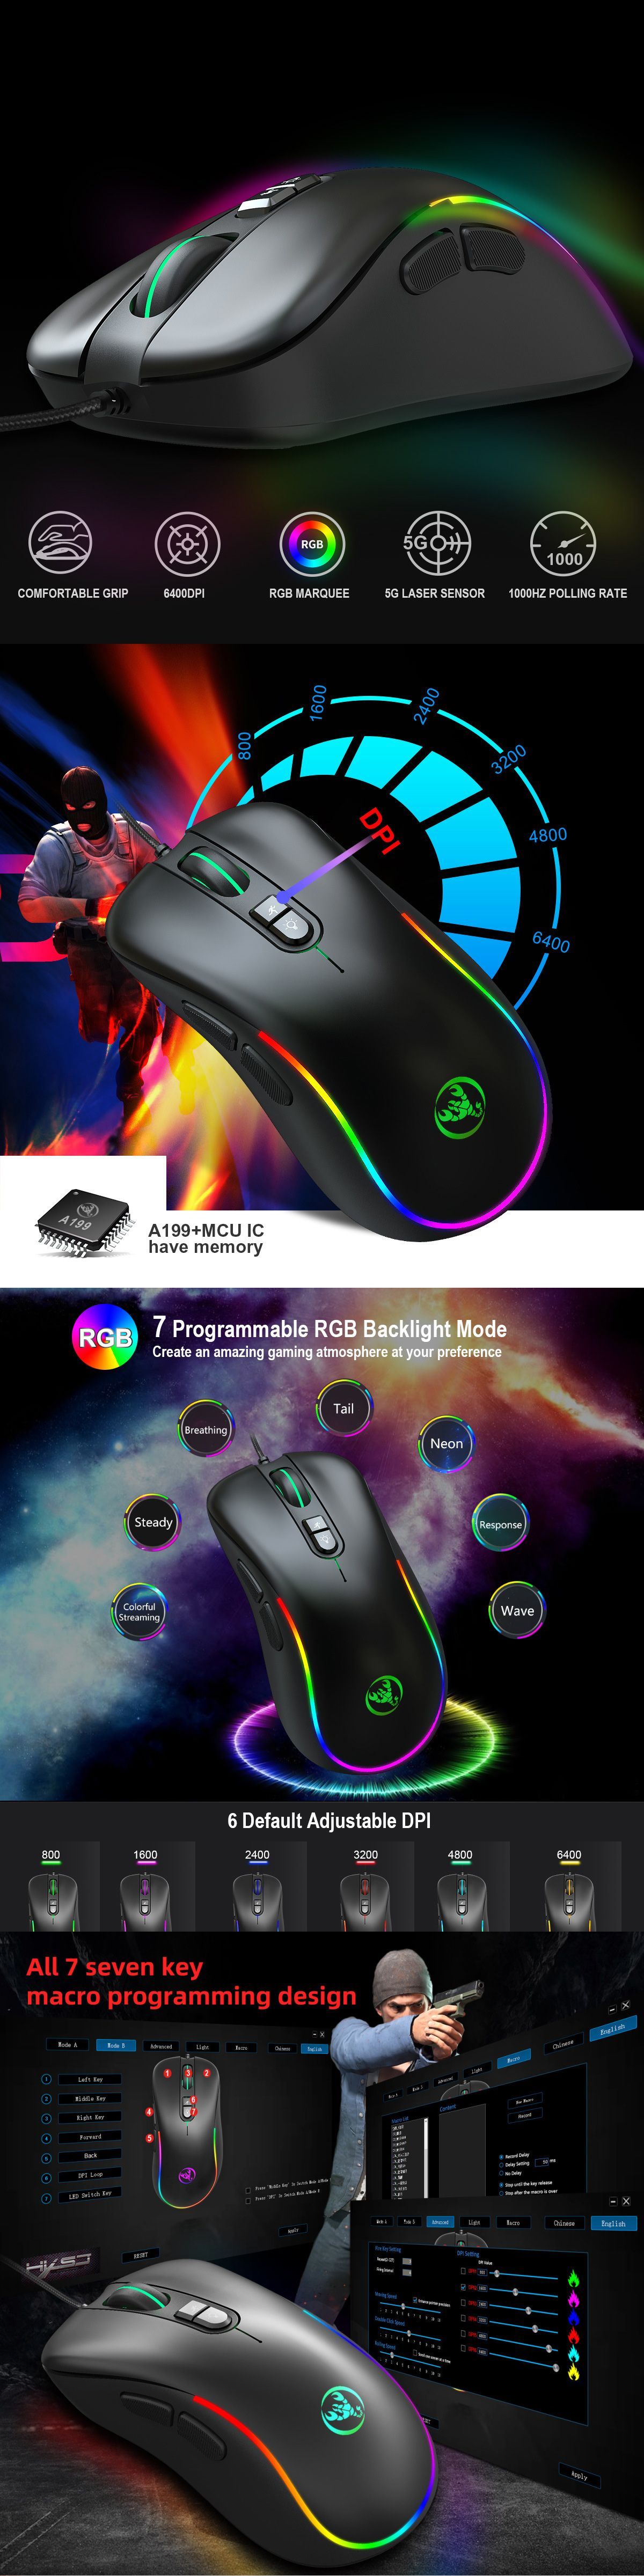 HXSJ-J300-Wired-Gaming-Mouse-7-Button-Macro-Programming-Mouse-6400DPI-Colorful-RGB-Backlight-USB-Wir-1663705